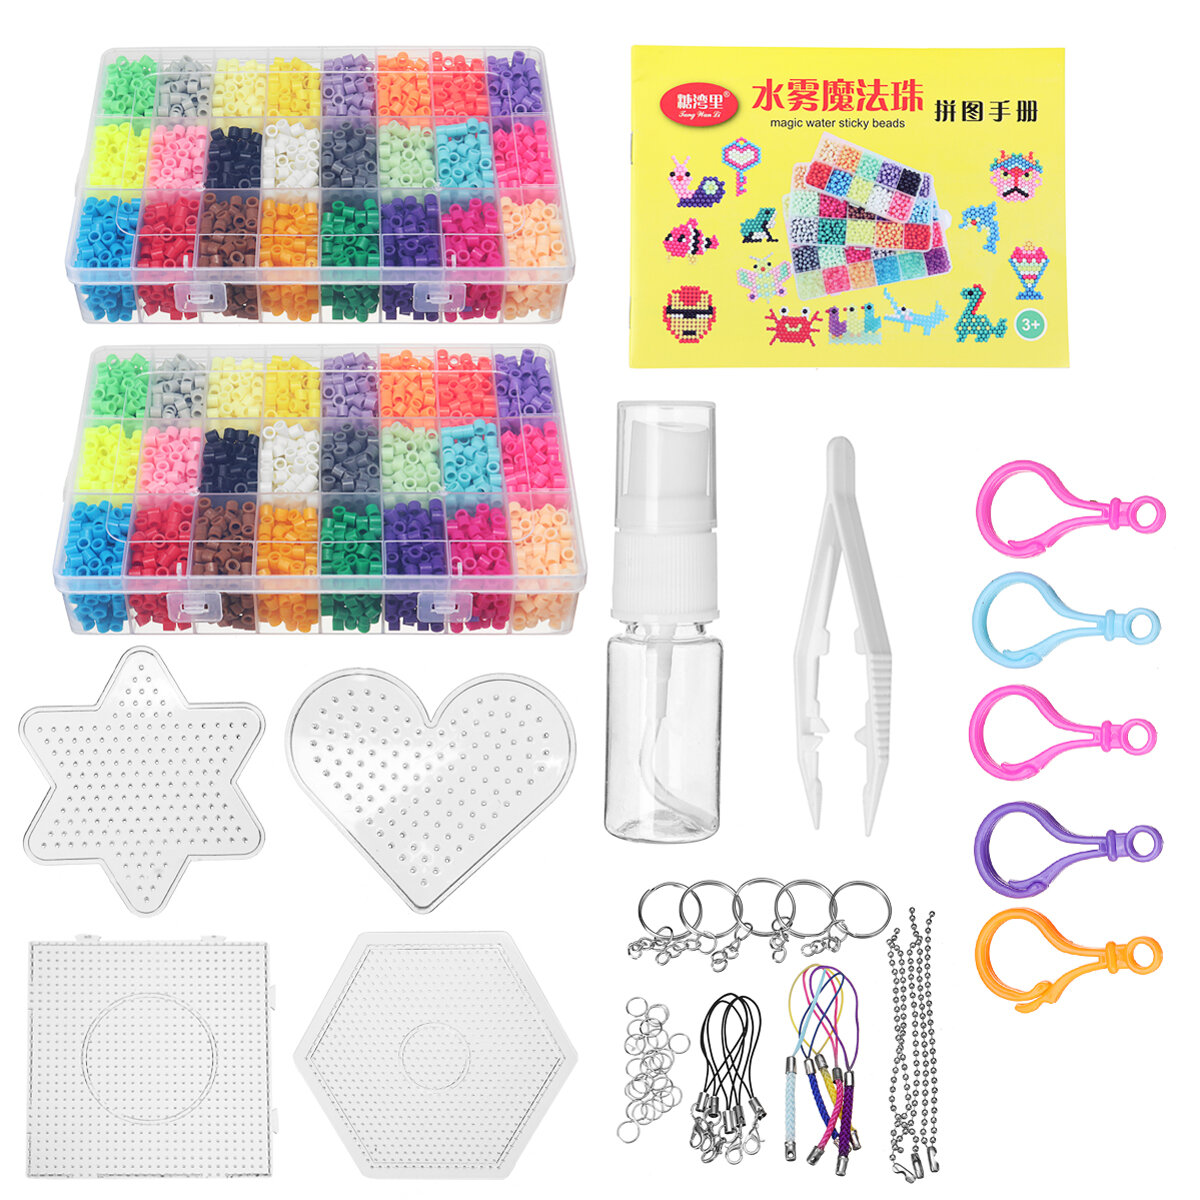 42 Colors 80 Patterns 18200 Pcs DIY Art Craft Fuse Beads Set for Kids with Pegboards Tweezers And Ironing Paper Fuse Beads Kit Pattern Cards 